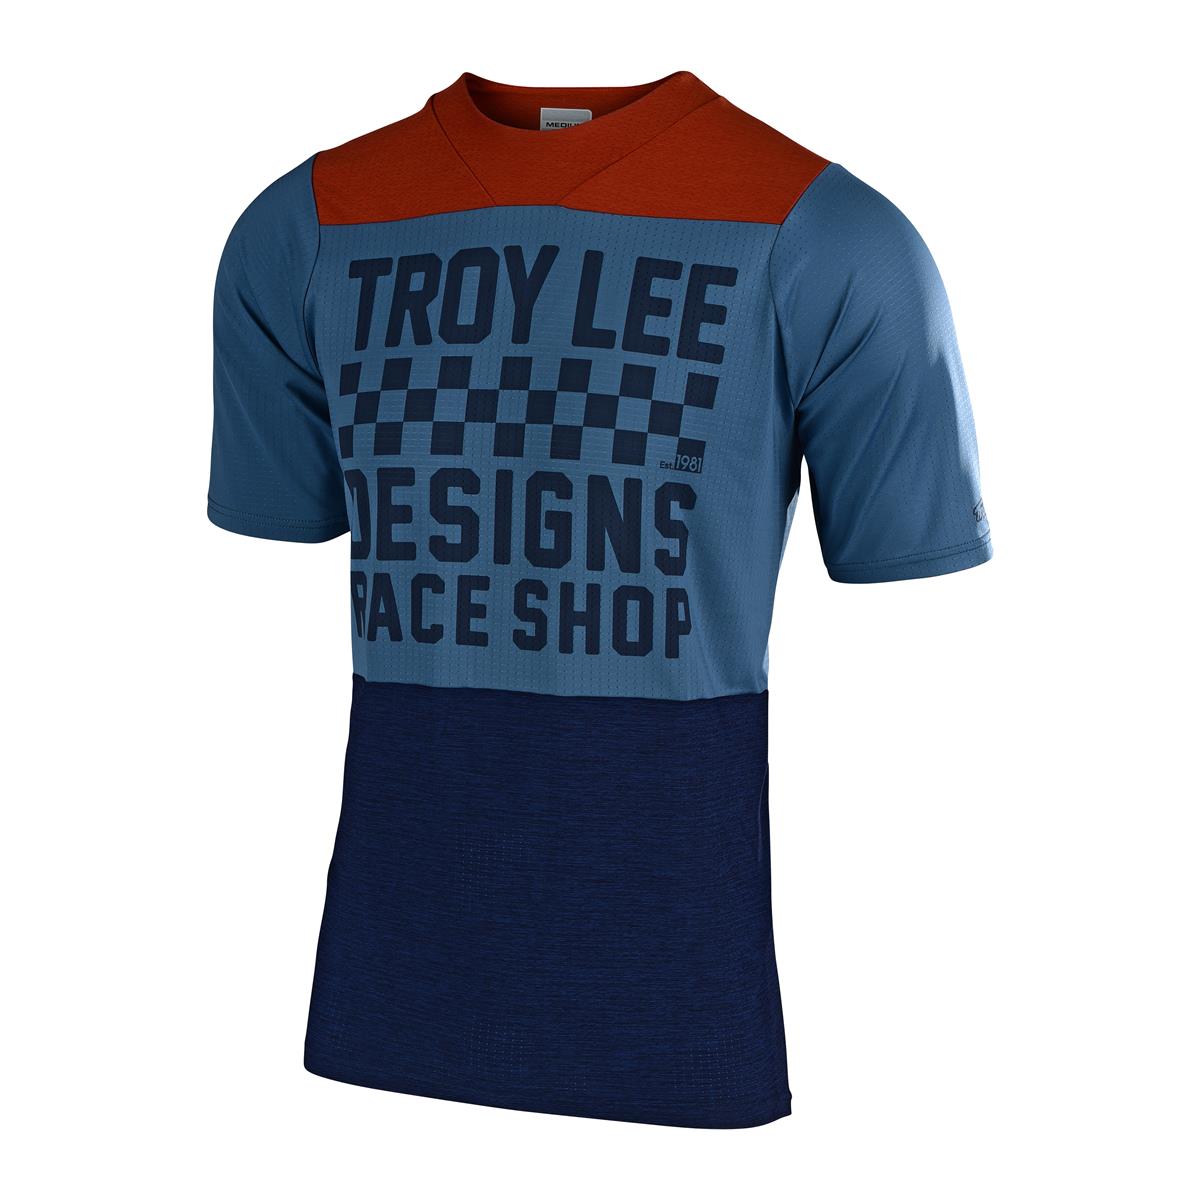 Troy Lee Designs Maillot VTT Manches Courtes Skyline Air Checkers - Heather Clay/Cadet